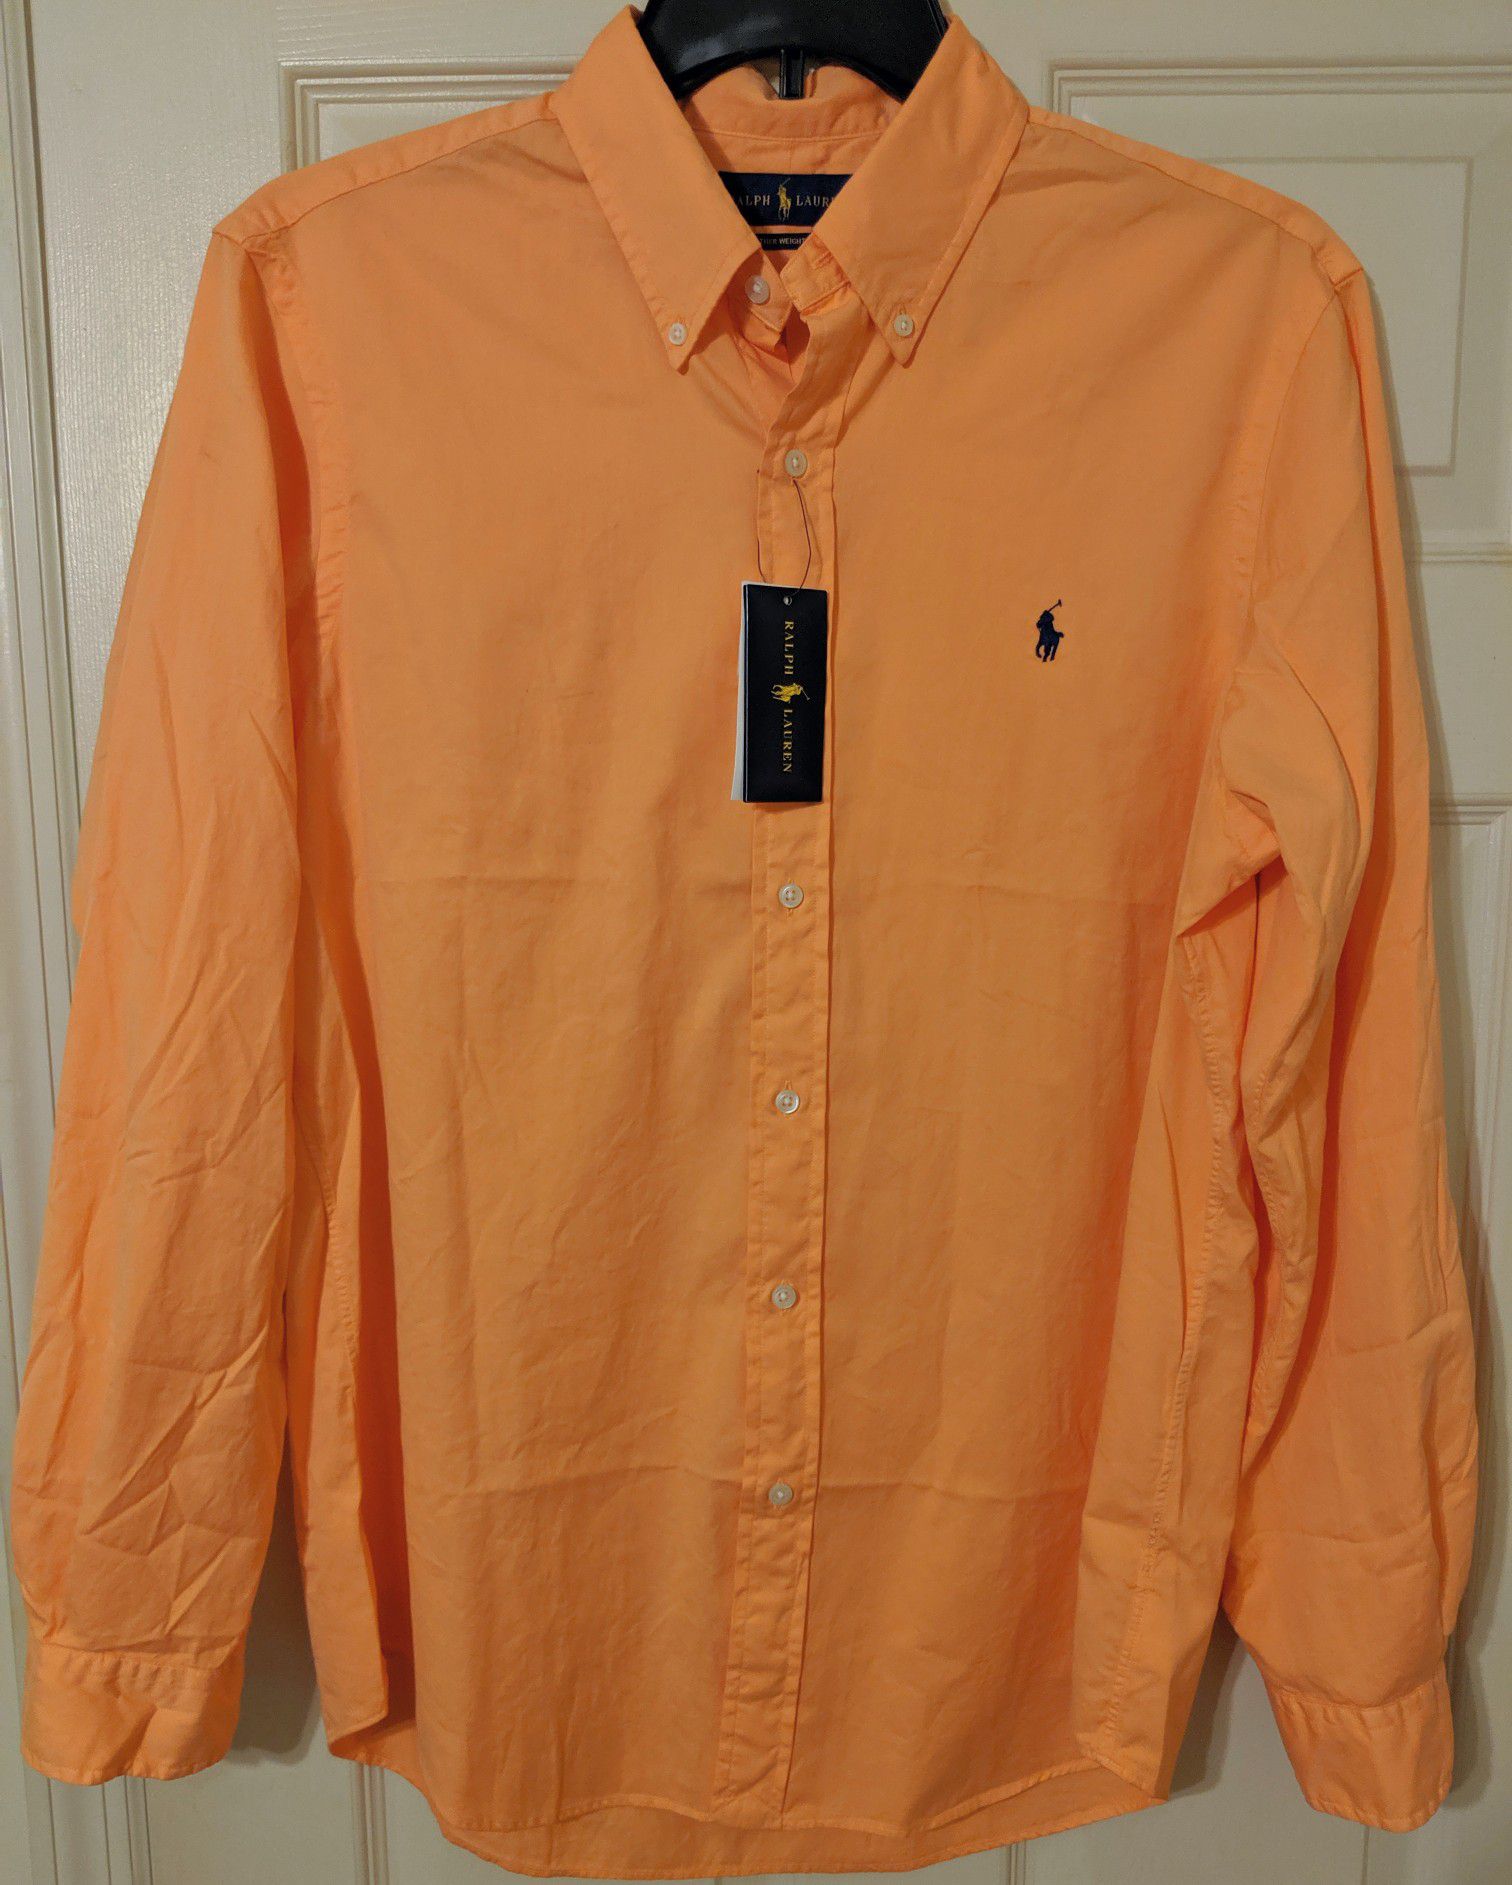 $89.50 Polo Ralph Lauren, Feather-Weight Twill Shirt Orange. Size L - BRAND NEW WITH TAGS